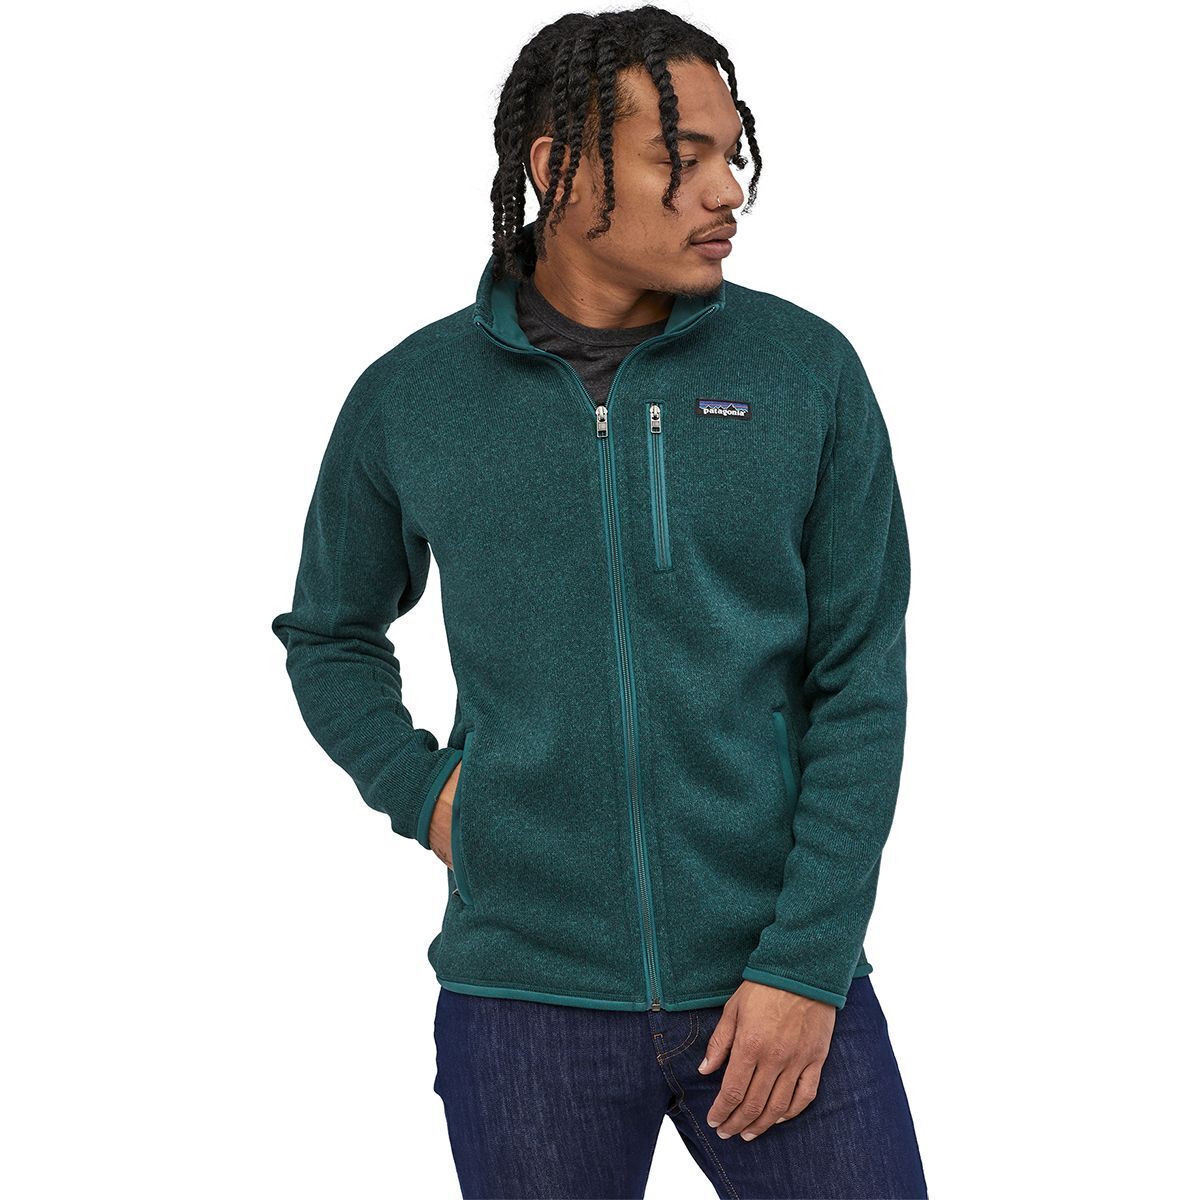 Patagonia Better Sweater...